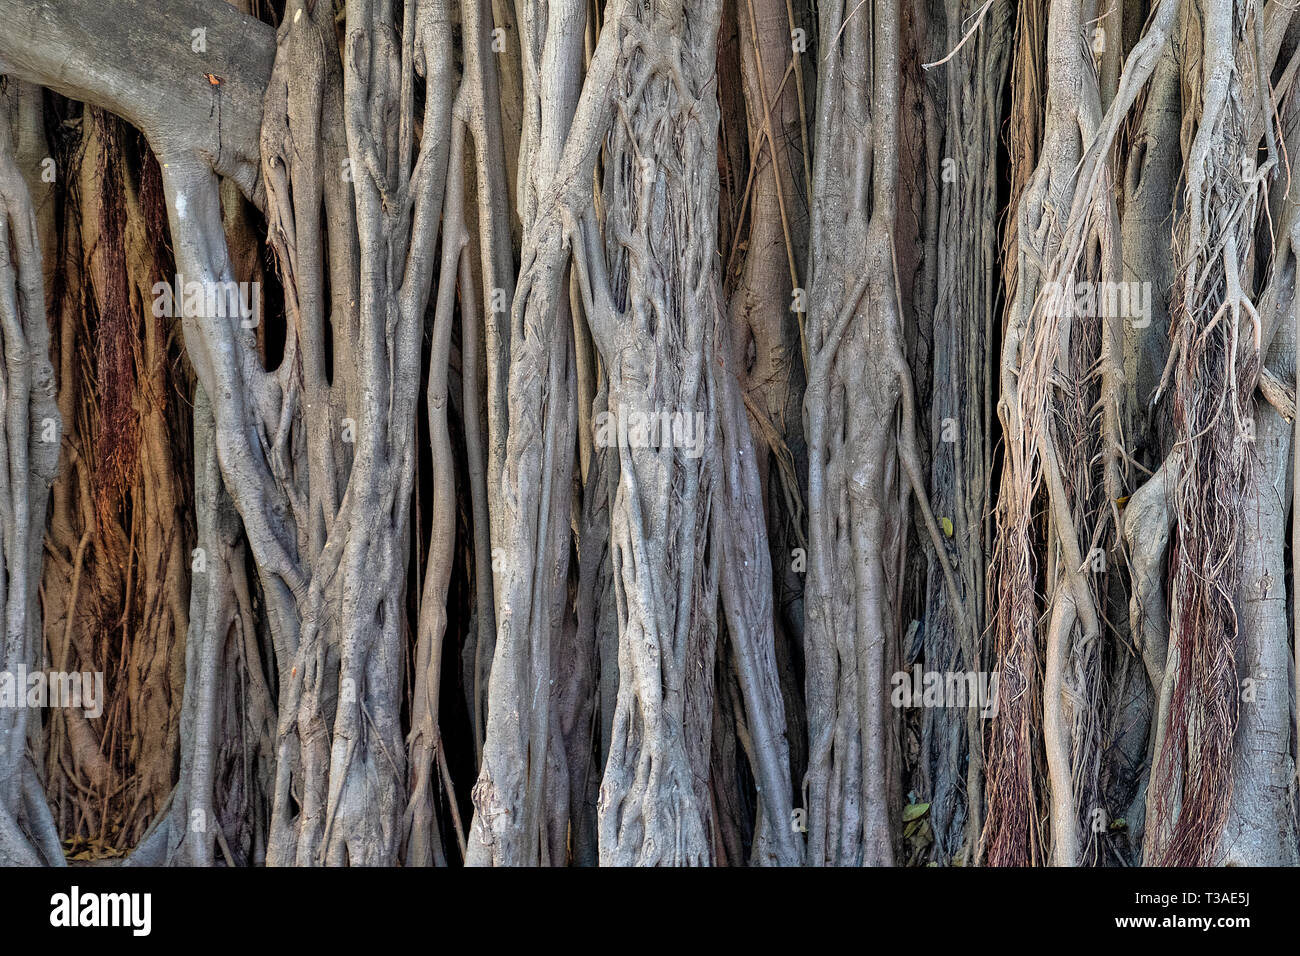 close up of detailed pattern of a banyan tree trunk Stock Photo